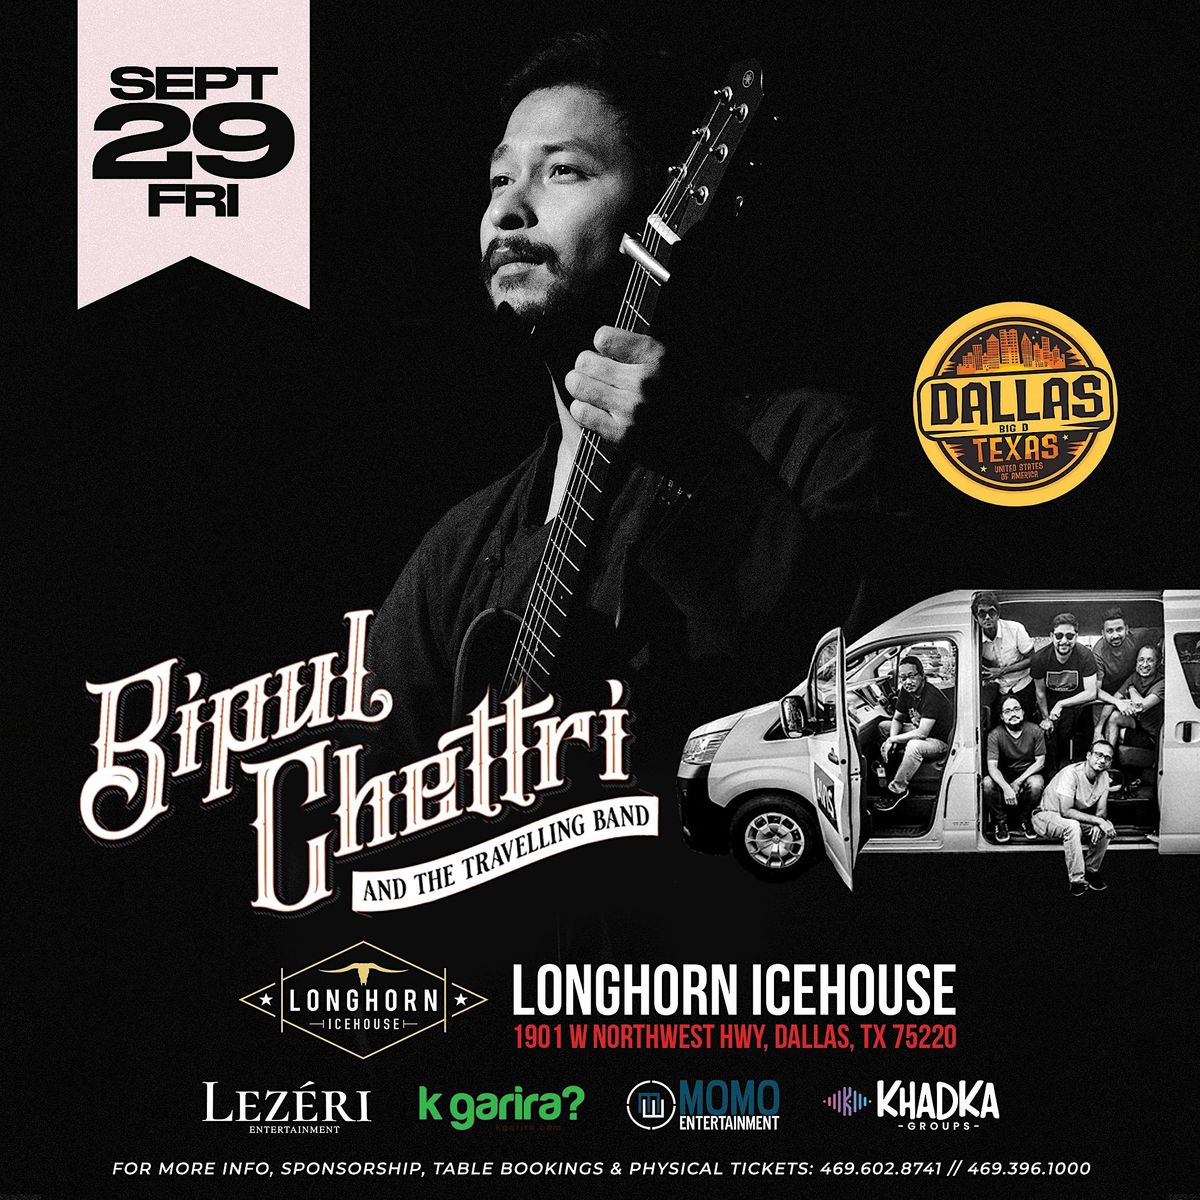 BIPUL CHETTRI AND THE TRAVELLING BAND - LIVE IN DALLAS